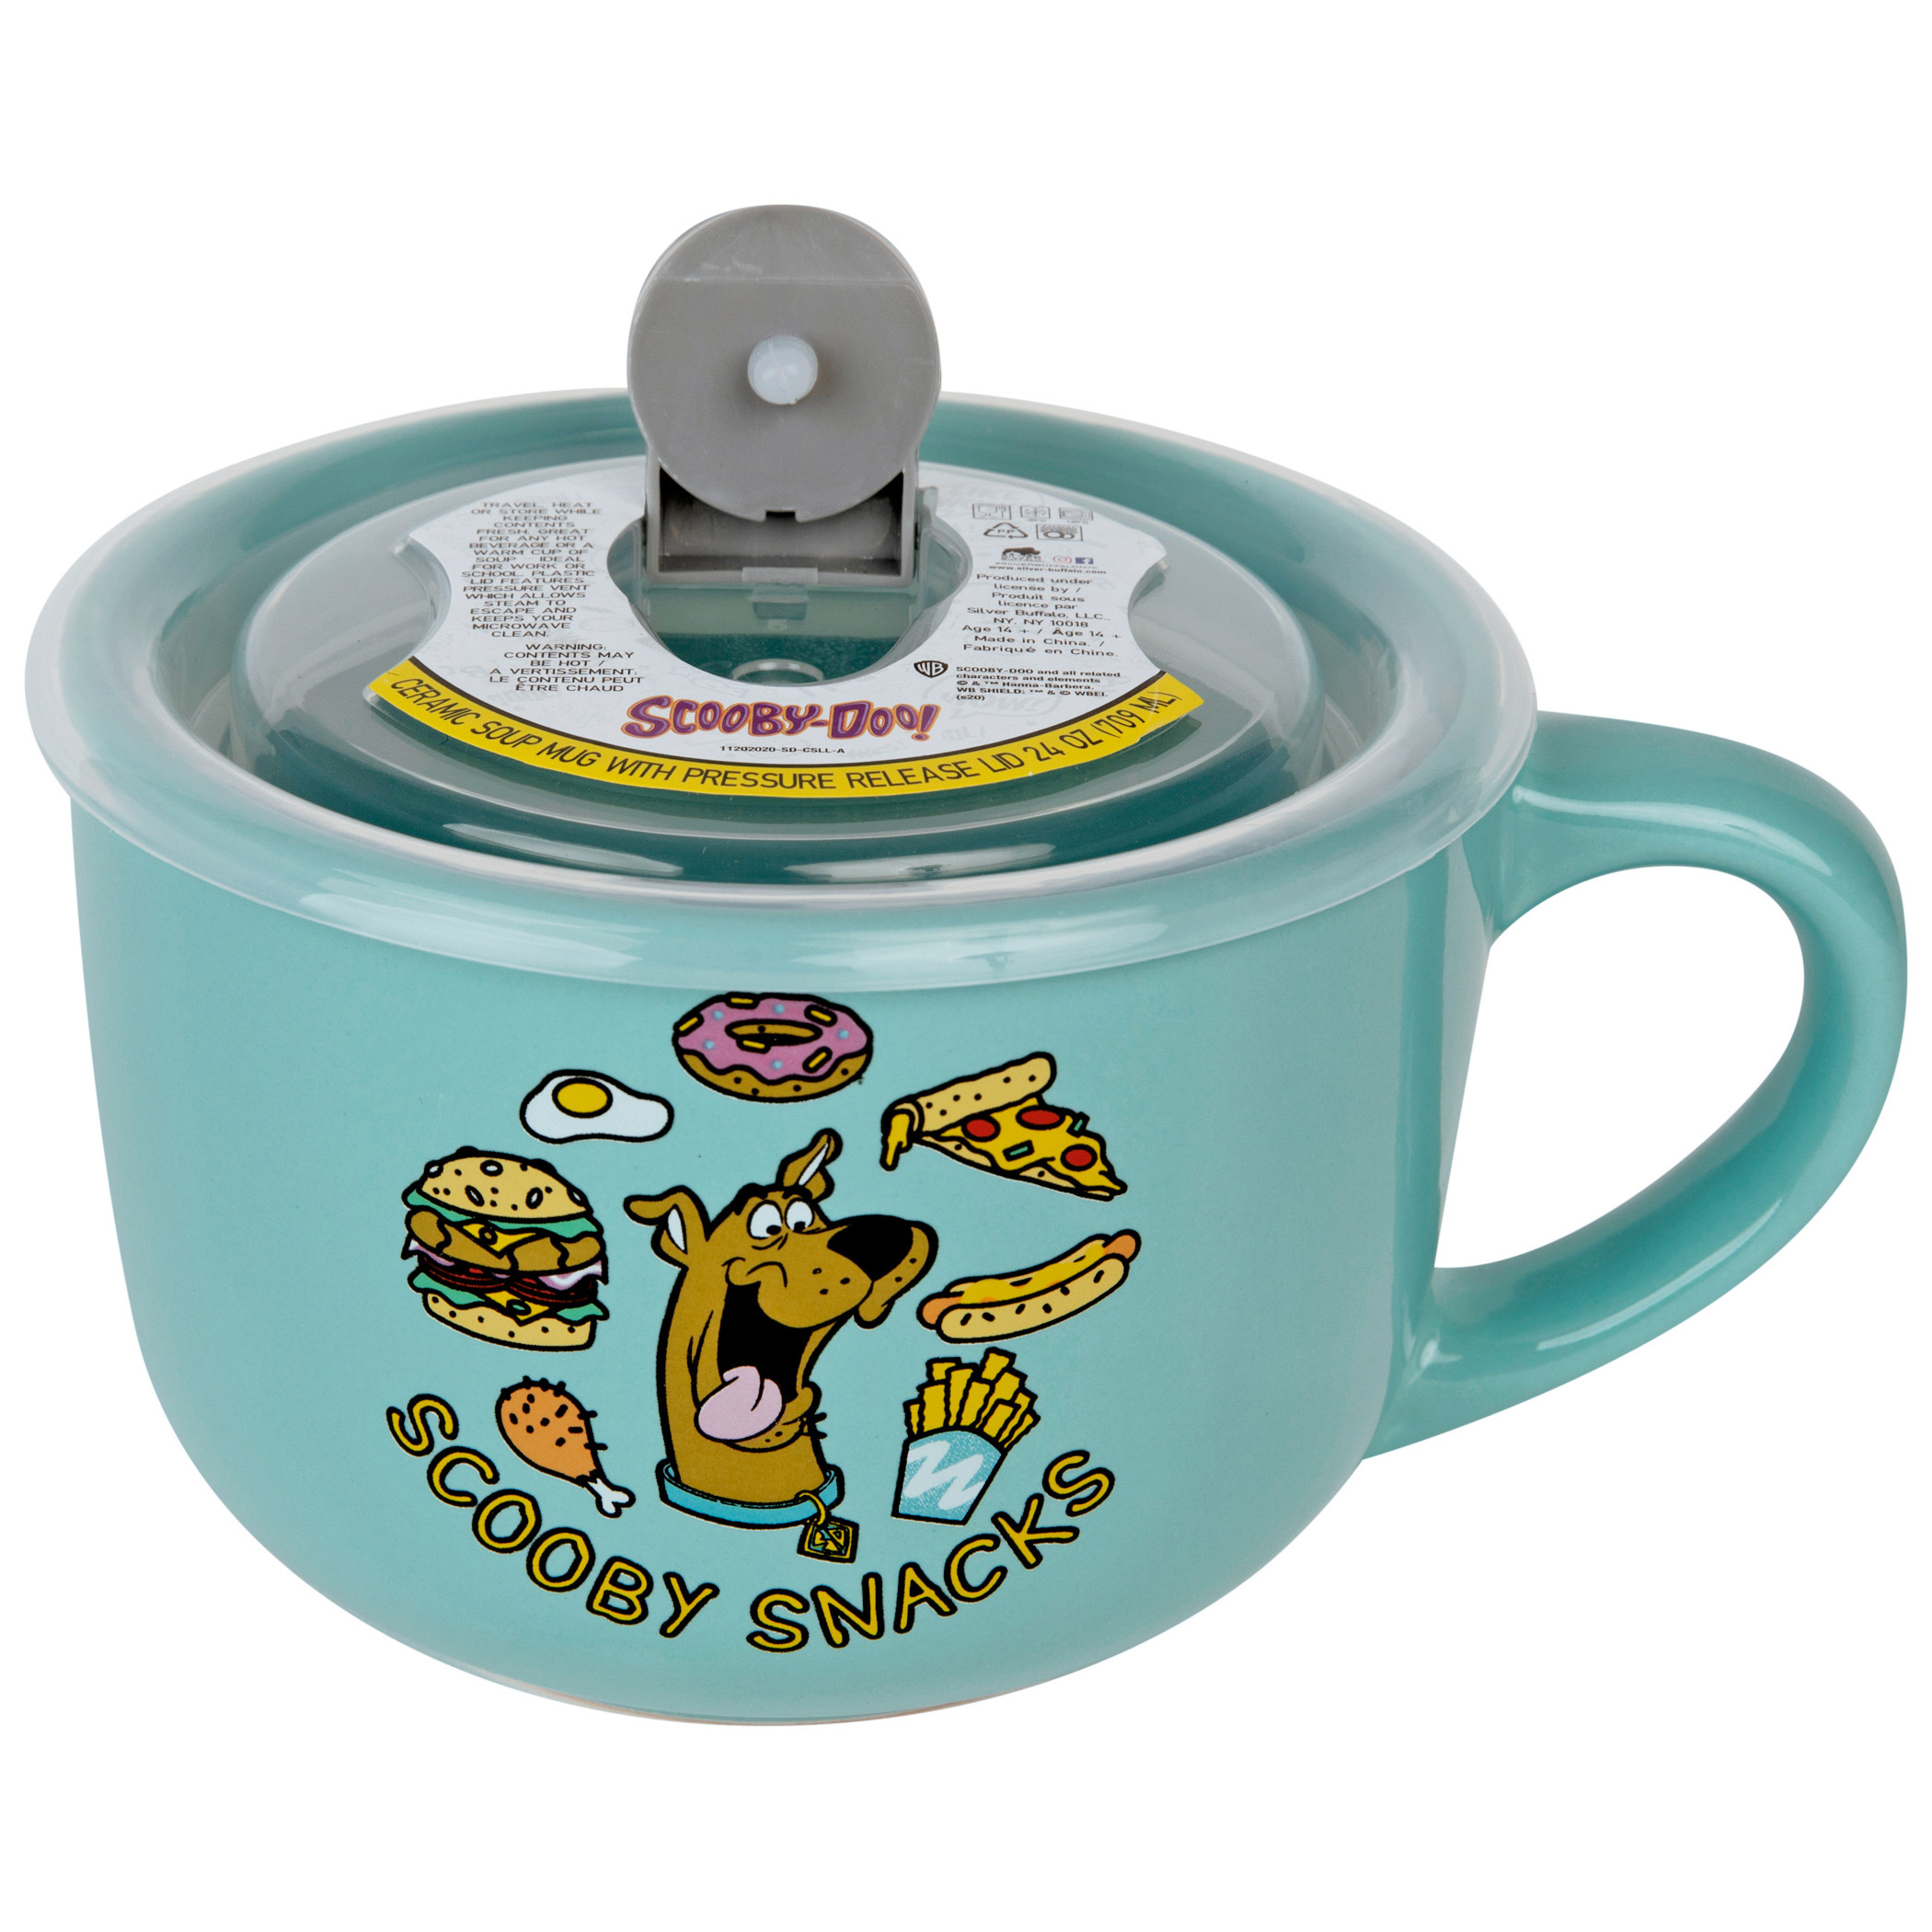 Scooby Doo Food Pattern 24 Ounce Ceramic Soup Mug with Lid